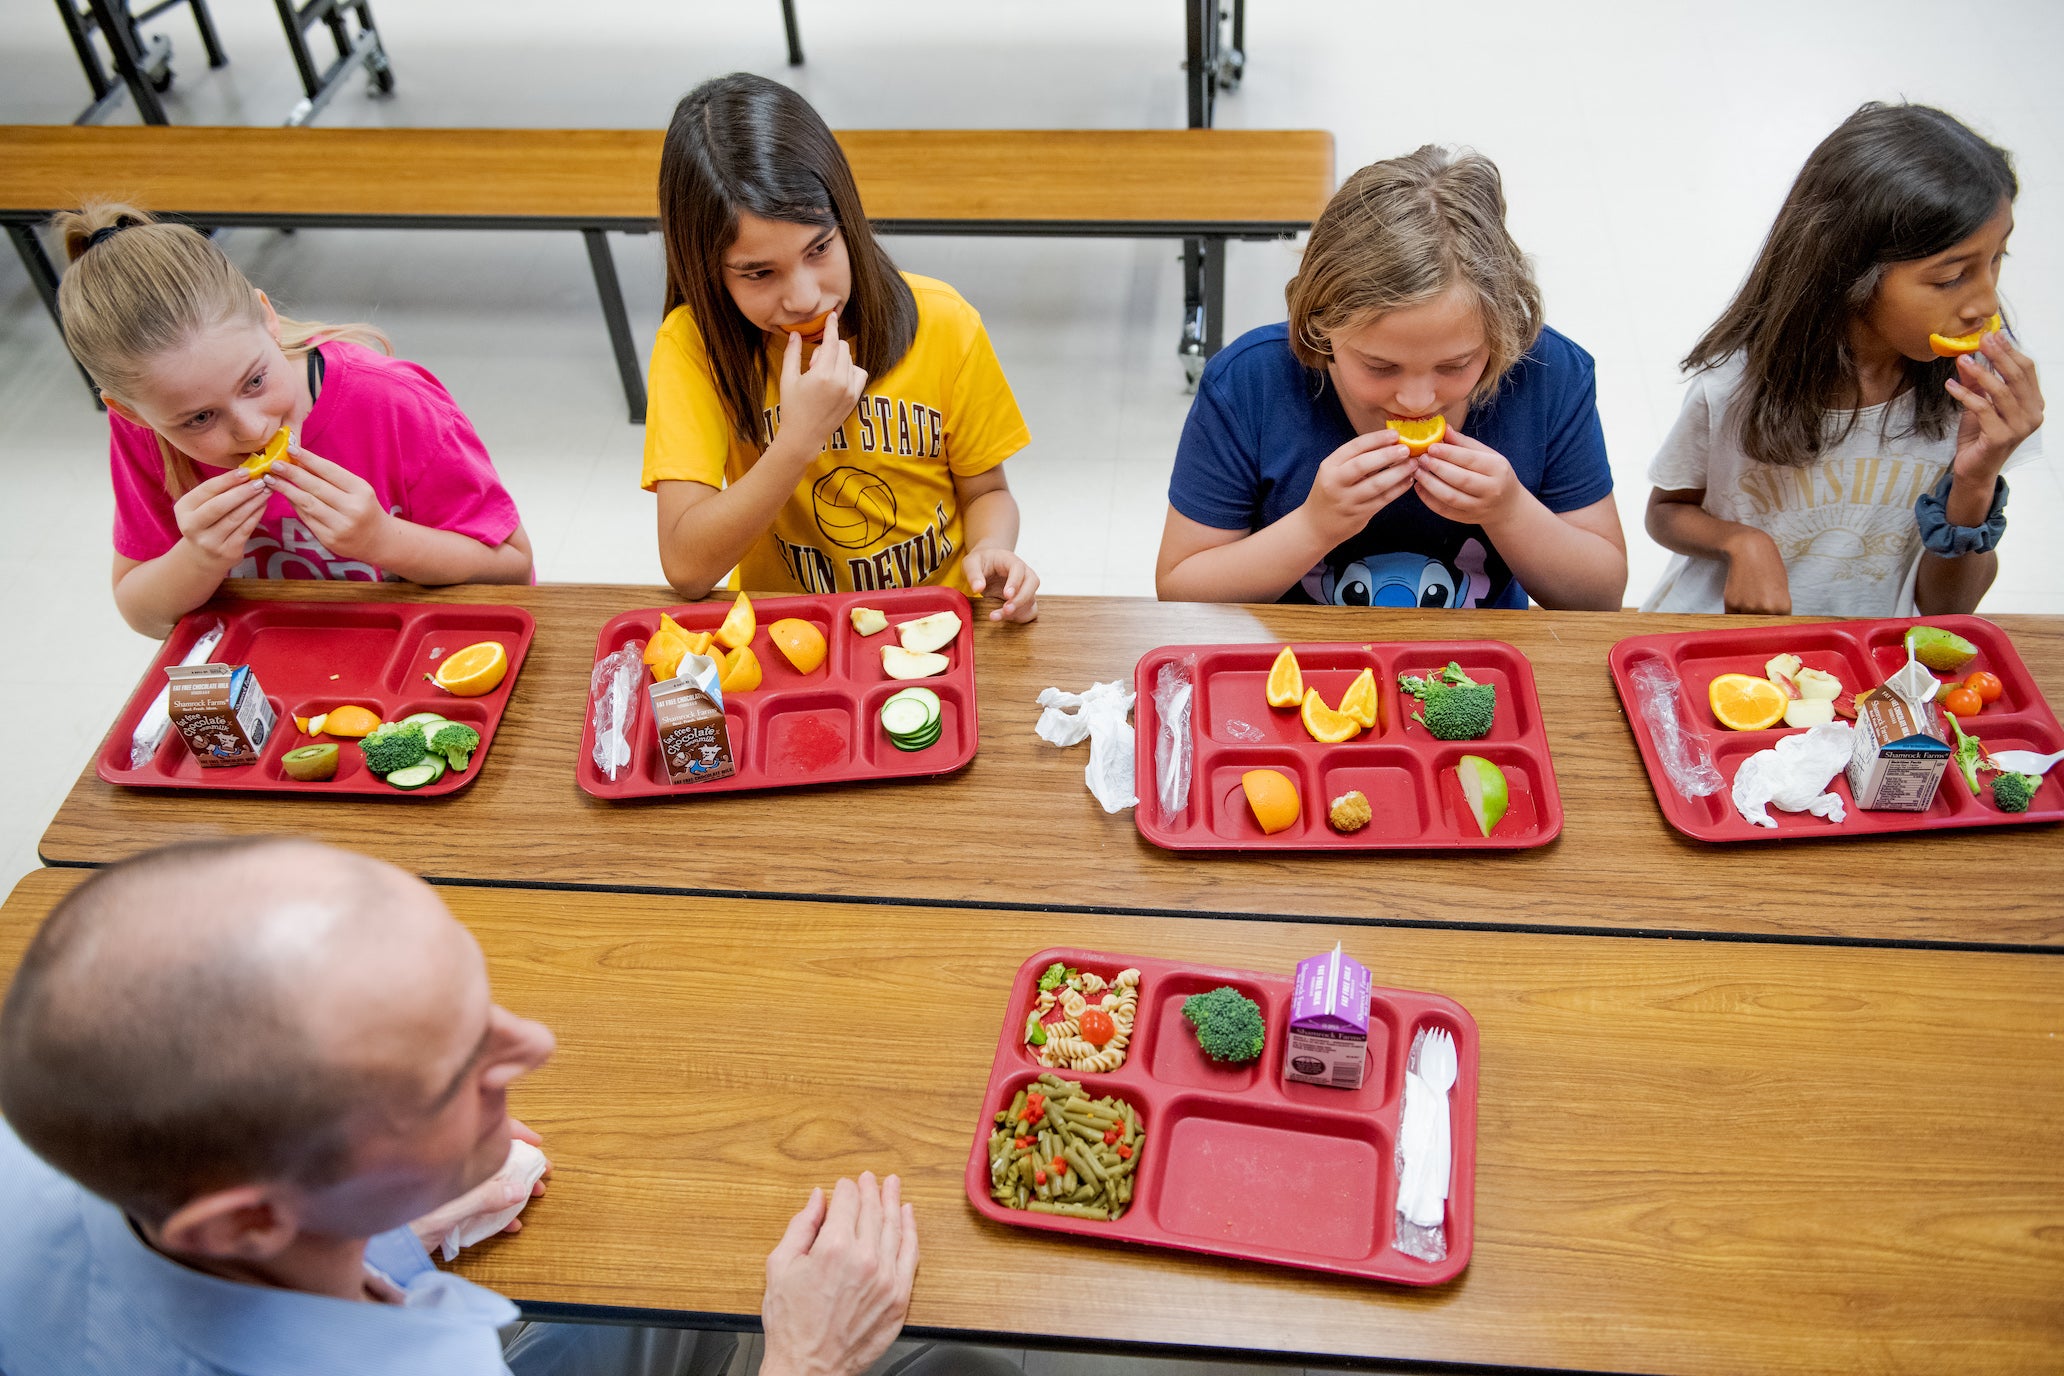 Overhead view of 4 children and one adult man sitting at a school cafeteria table. Each of the people have a red lunch tray containing fruits and vegetables sitting in front of them on the table. Some of the children are eating the fruits and vegetables.